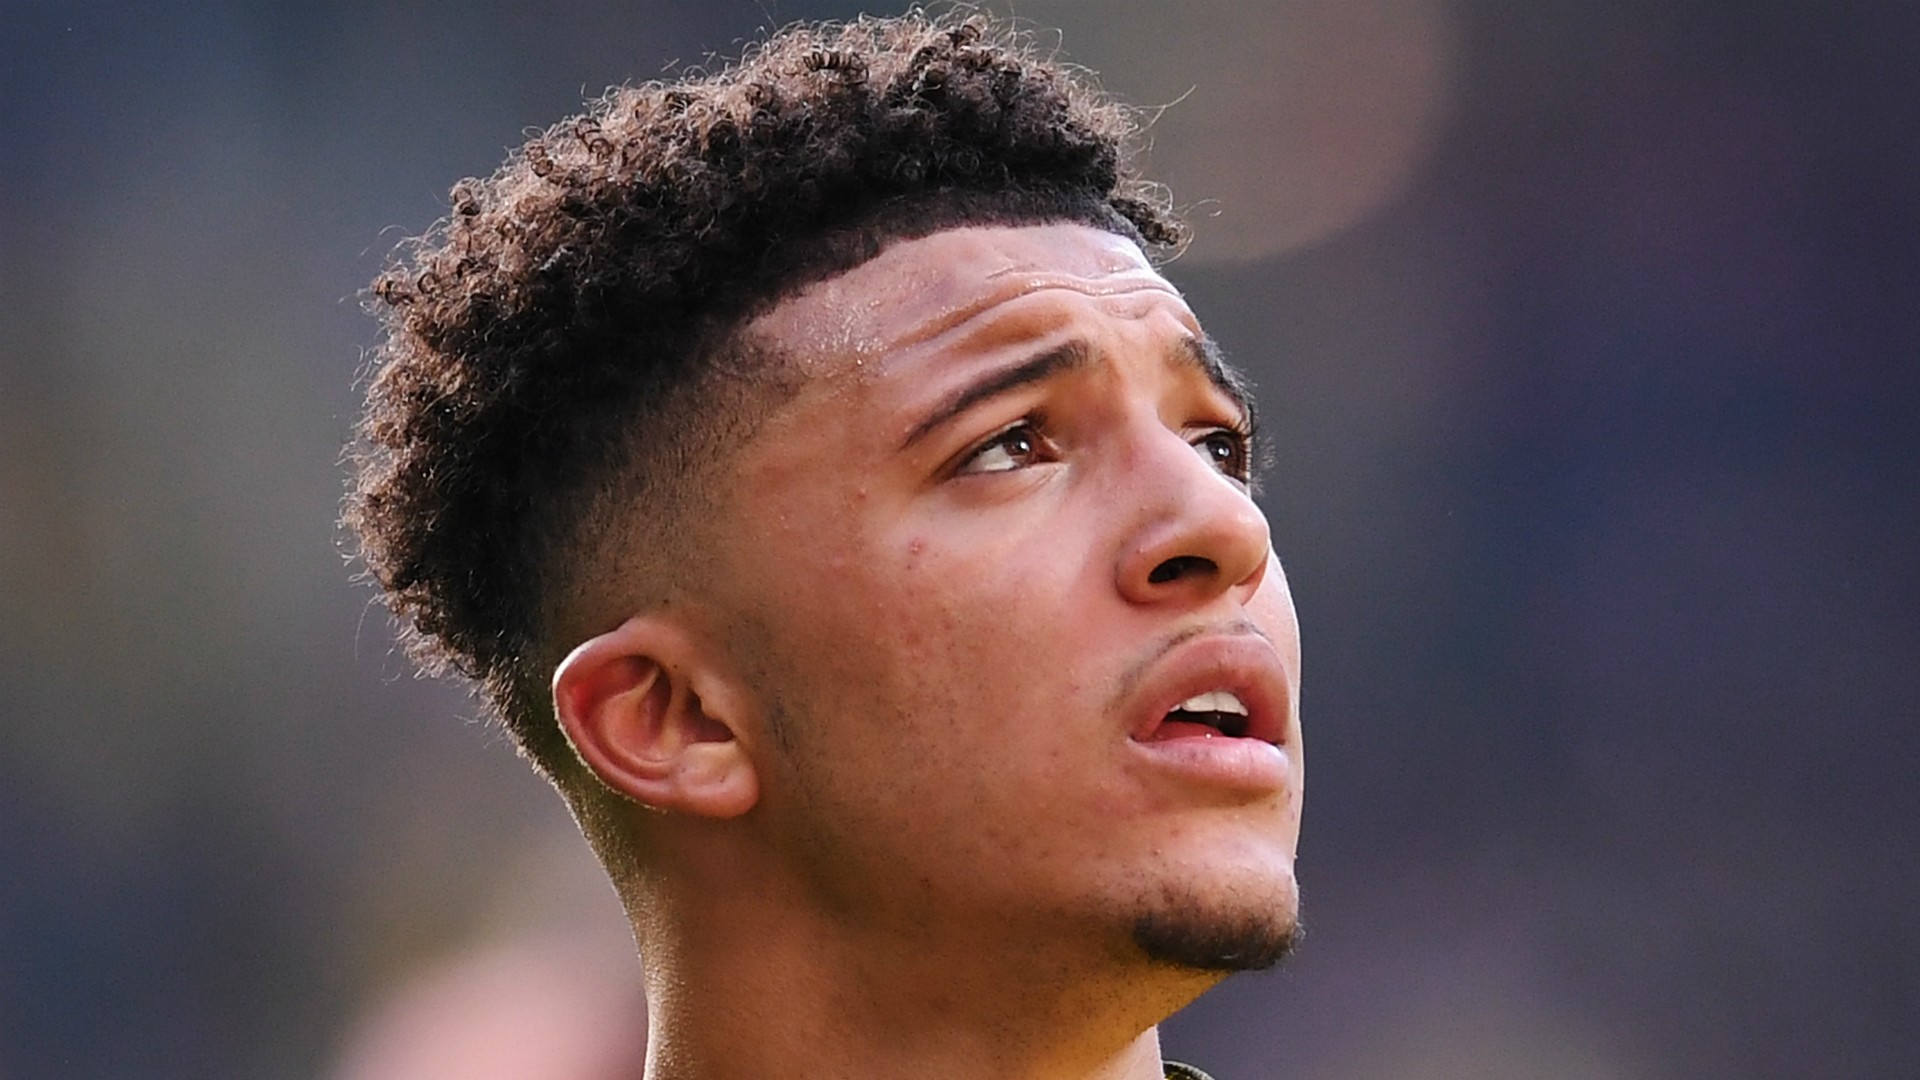 In setting his sights on the Bundesliga title with Borussia Dortmund next season, Jadon Sancho distanced himself from transfer speculation.